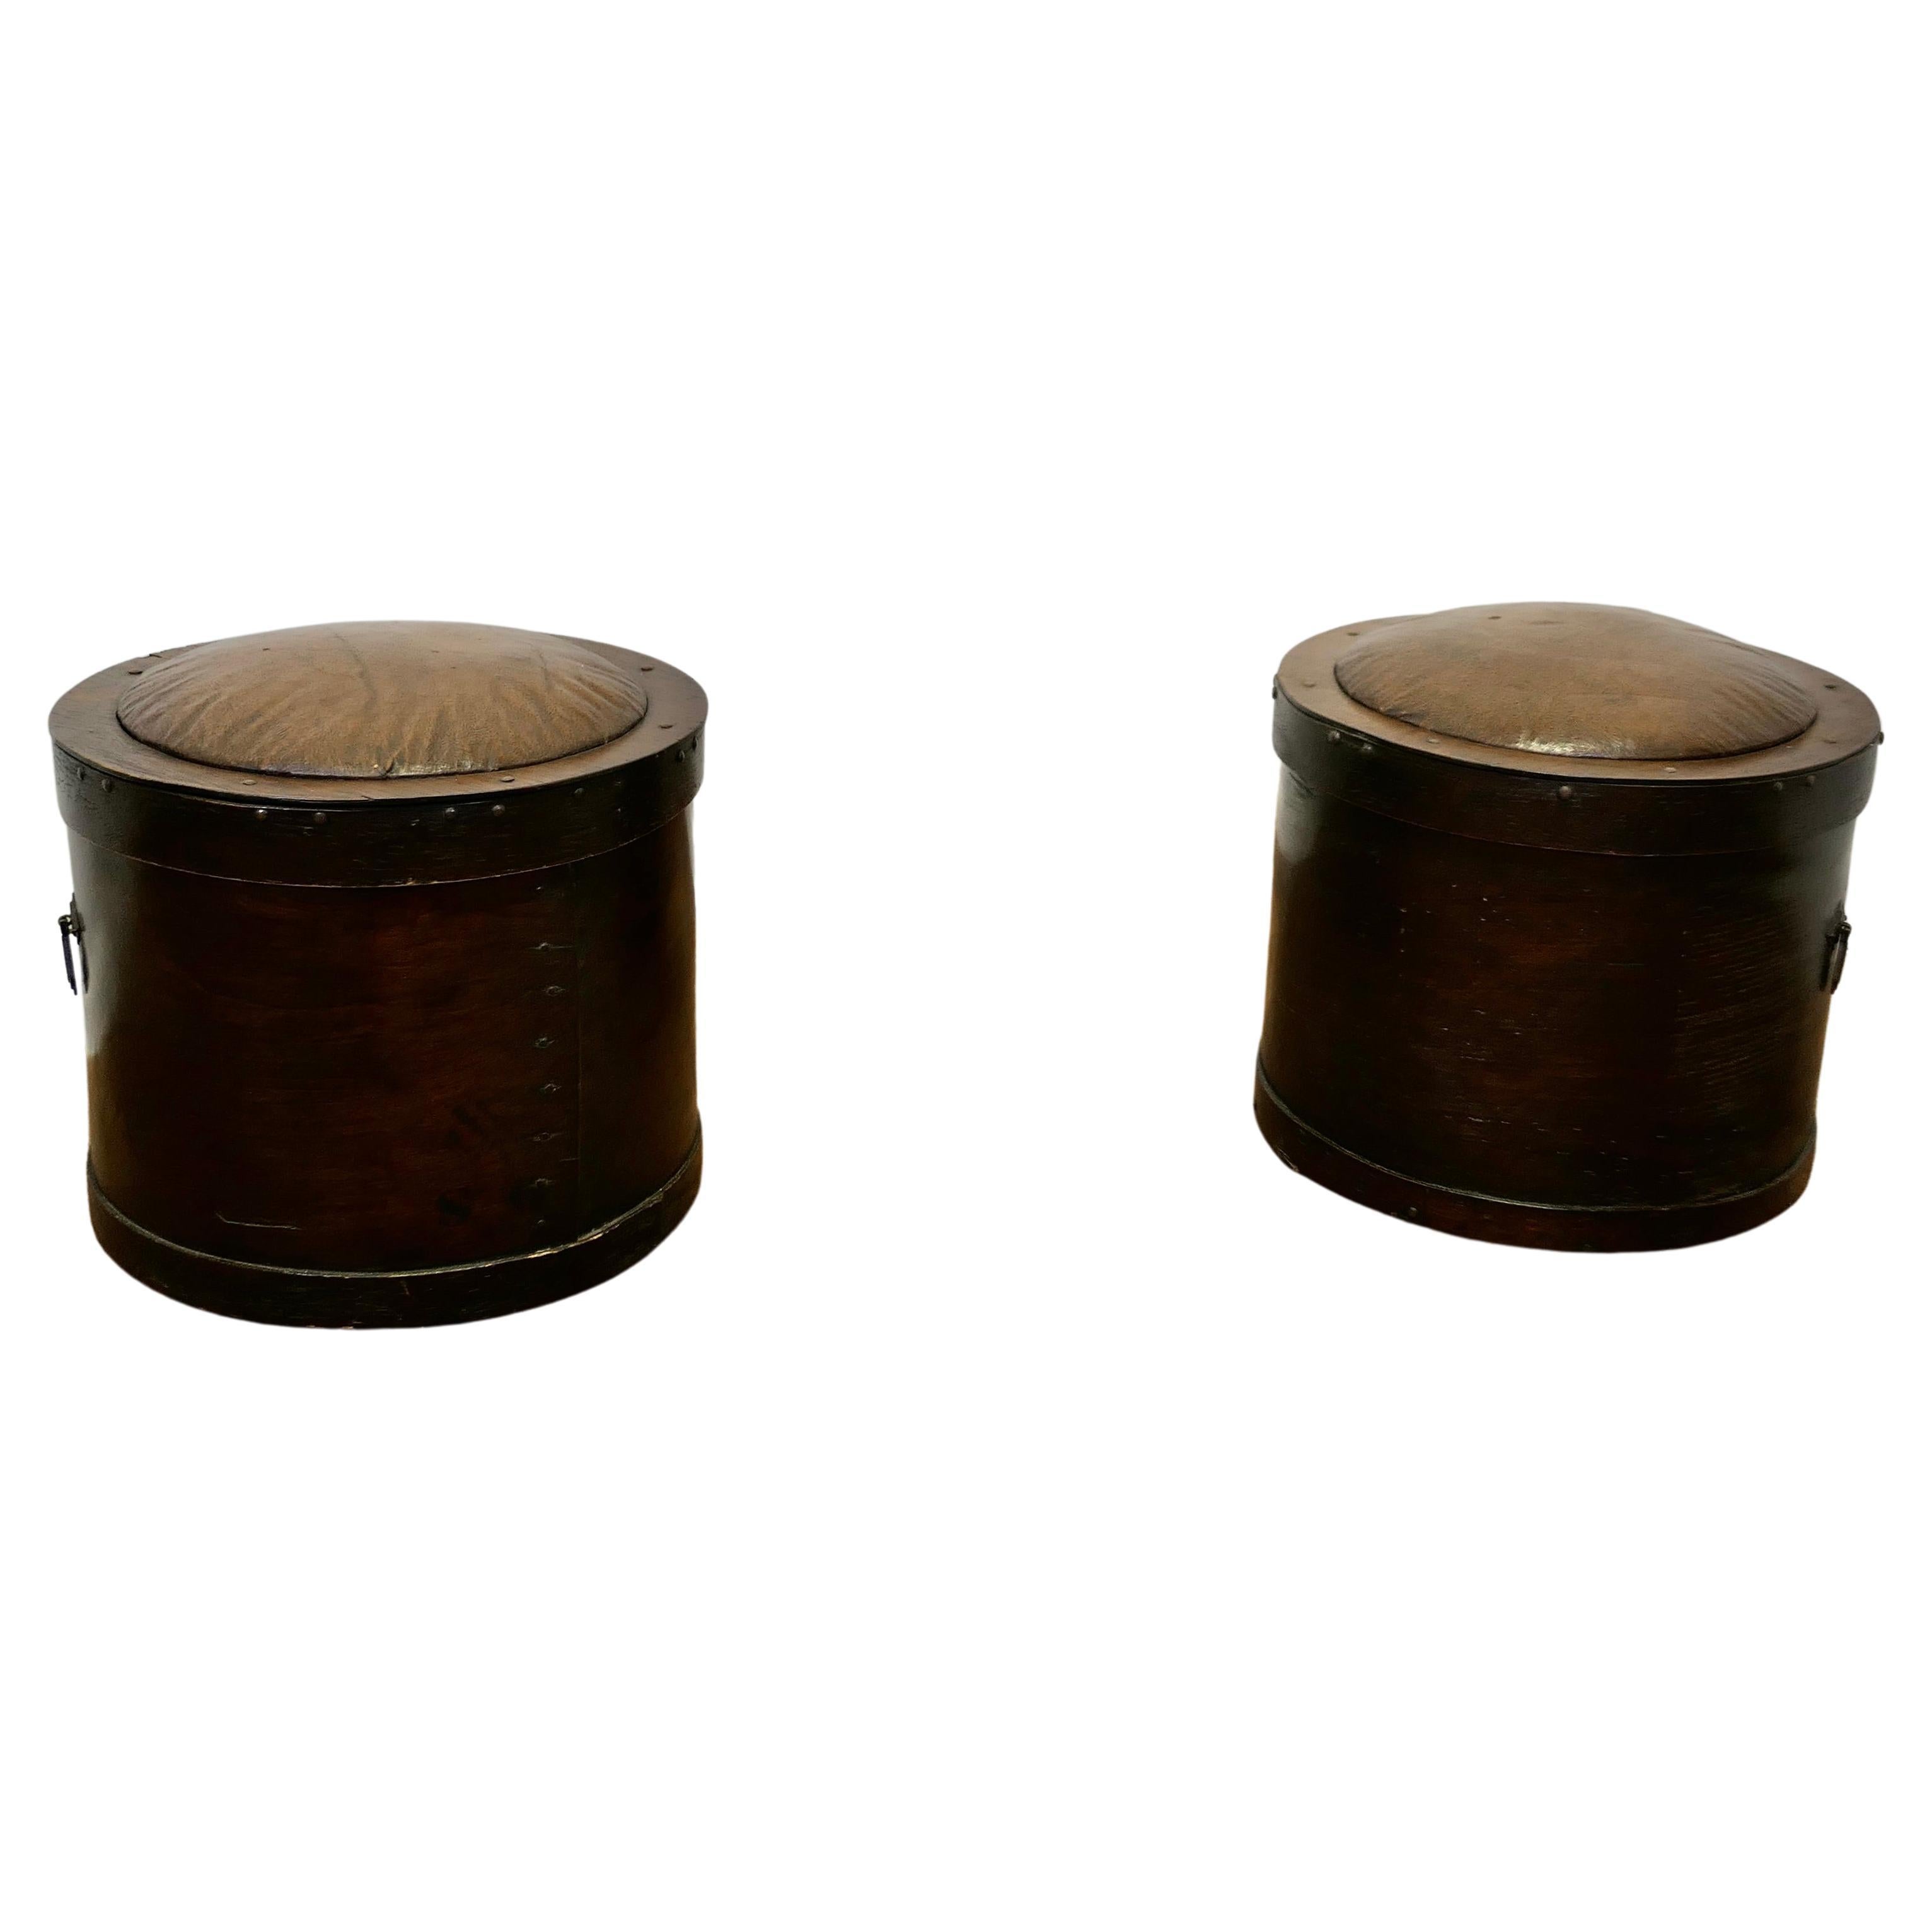 A Pair of 1920s Fireside Stools for Coal and Logs  An attractive pair   For Sale